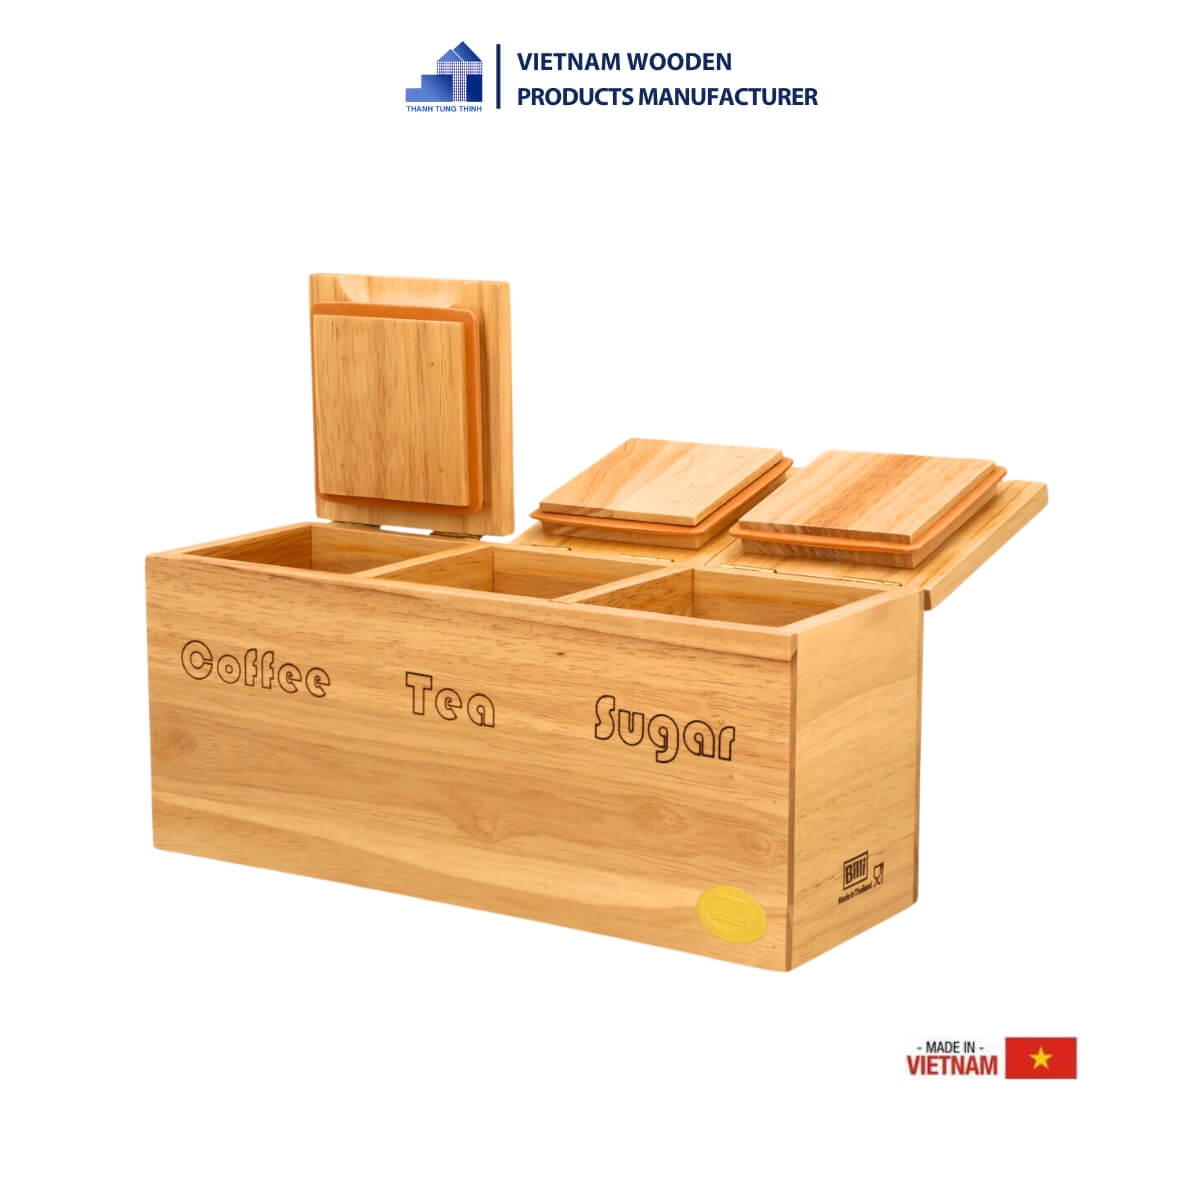 User-friendly and convenient 3-compartment Tea & Coffee box, perfect for wholesale.